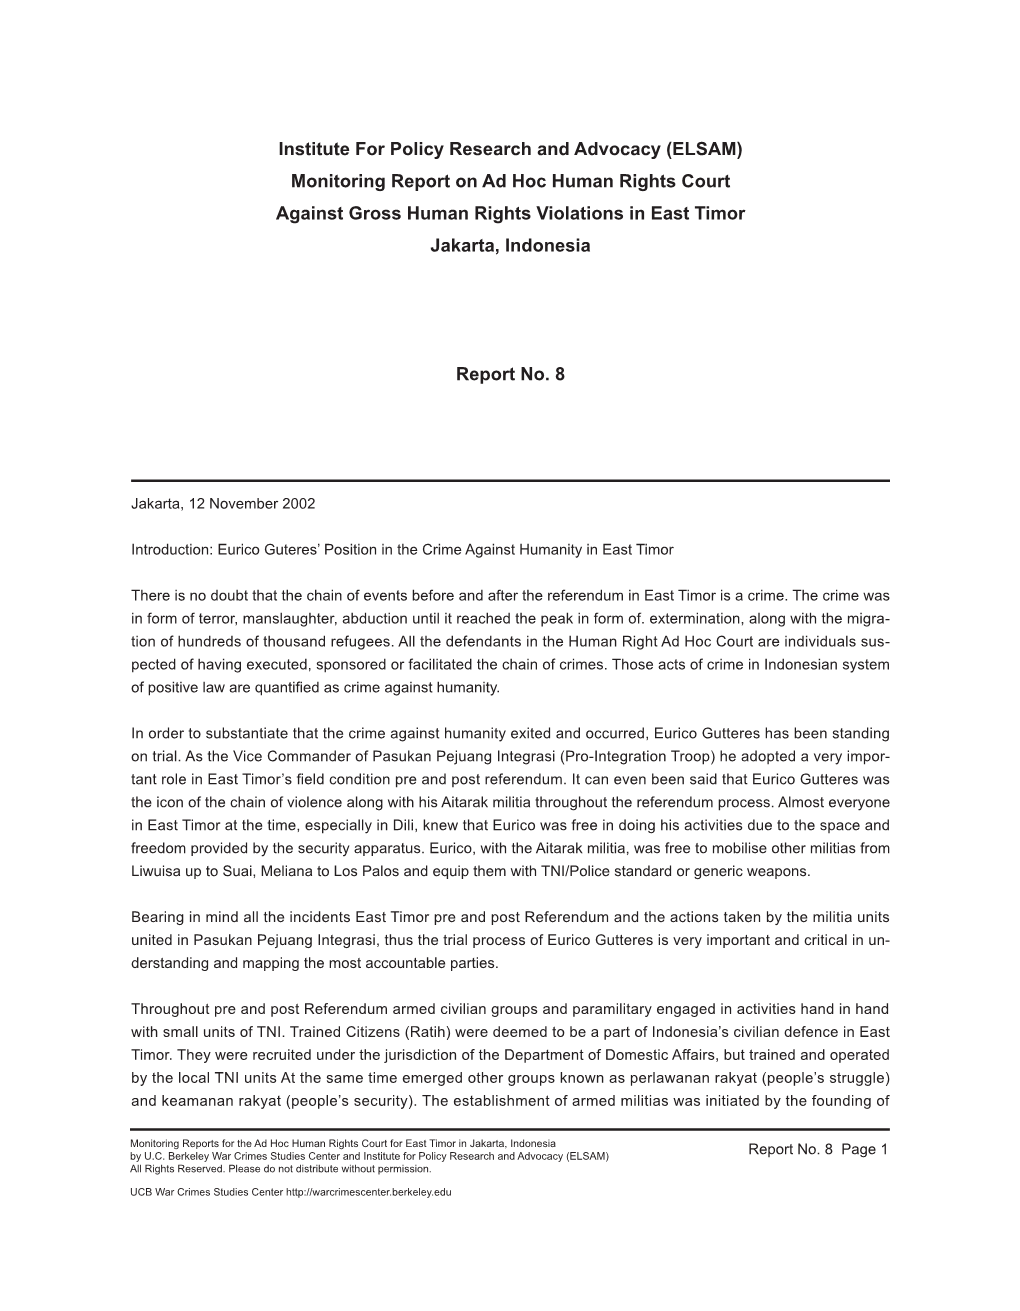 Institute for Policy Research and Advocacy (ELSAM) Monitoring Report on Ad Hoc Human Rights Court Against Gross Human Rights